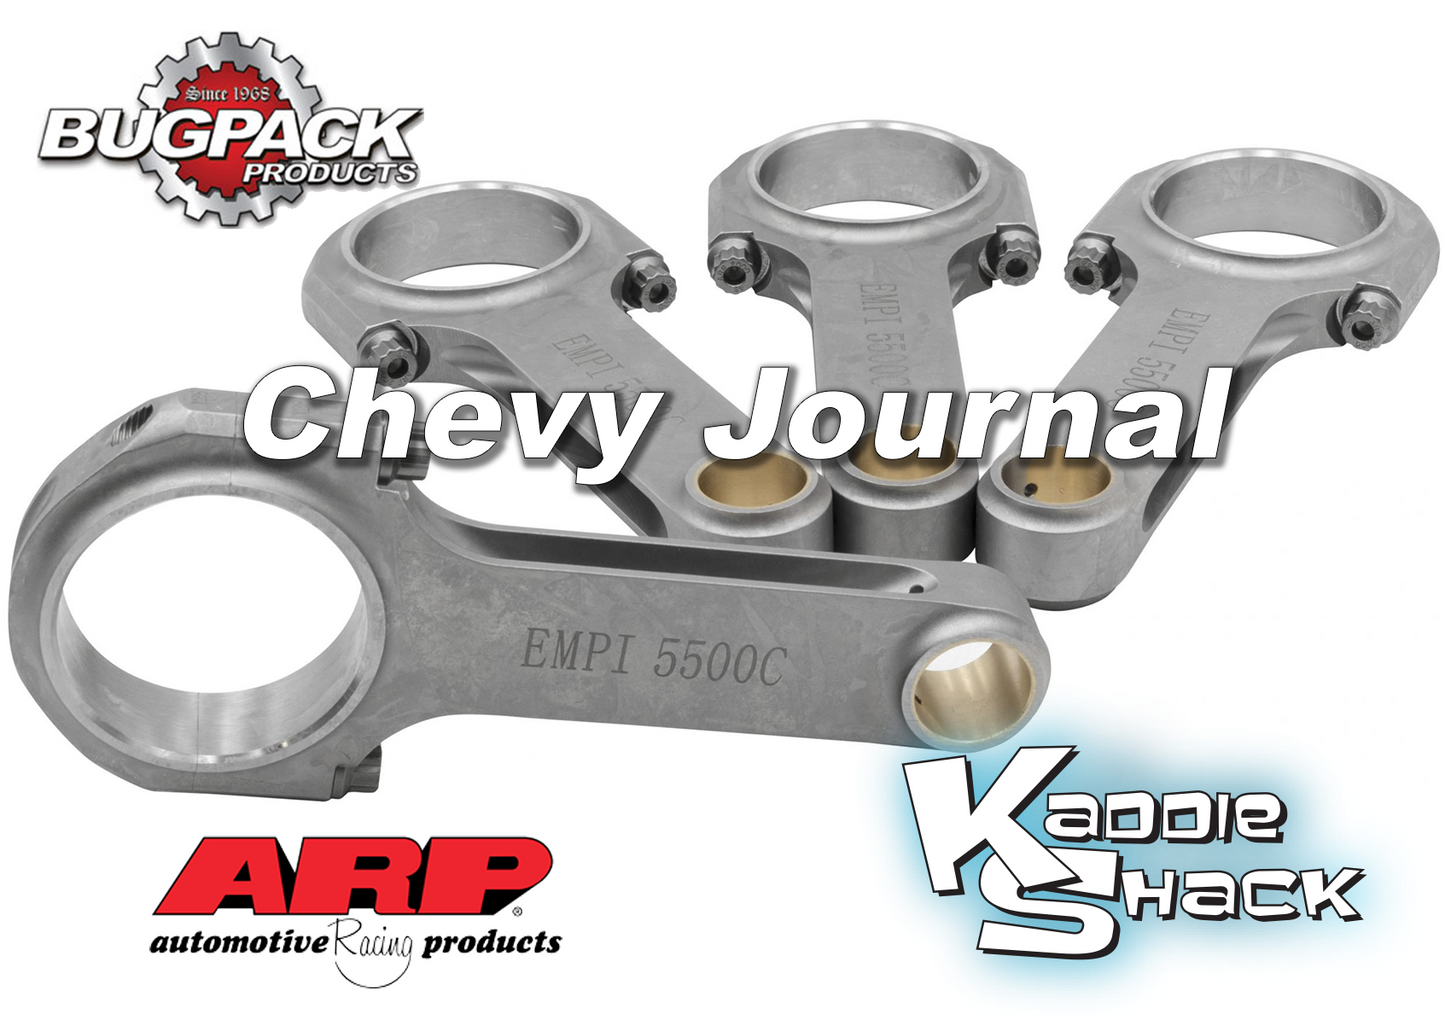 Bugpack Forged 4340 Chromoly H-Beam Rods, 5.5" Chevy Journal